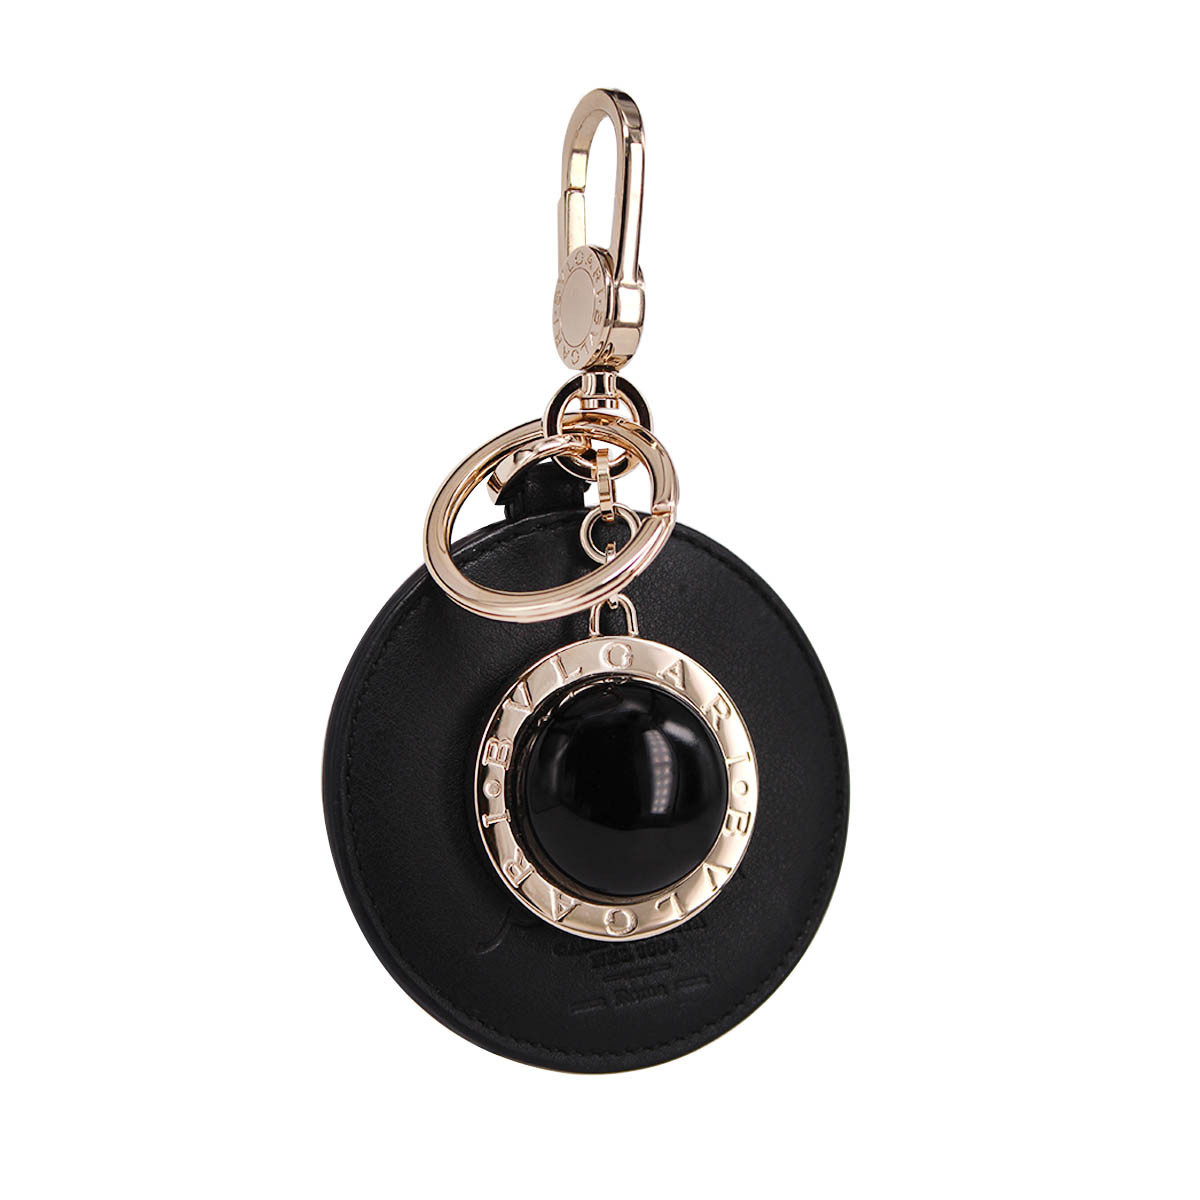 BVLGARI KEY RING WITH STONE AND LEATHER 34440